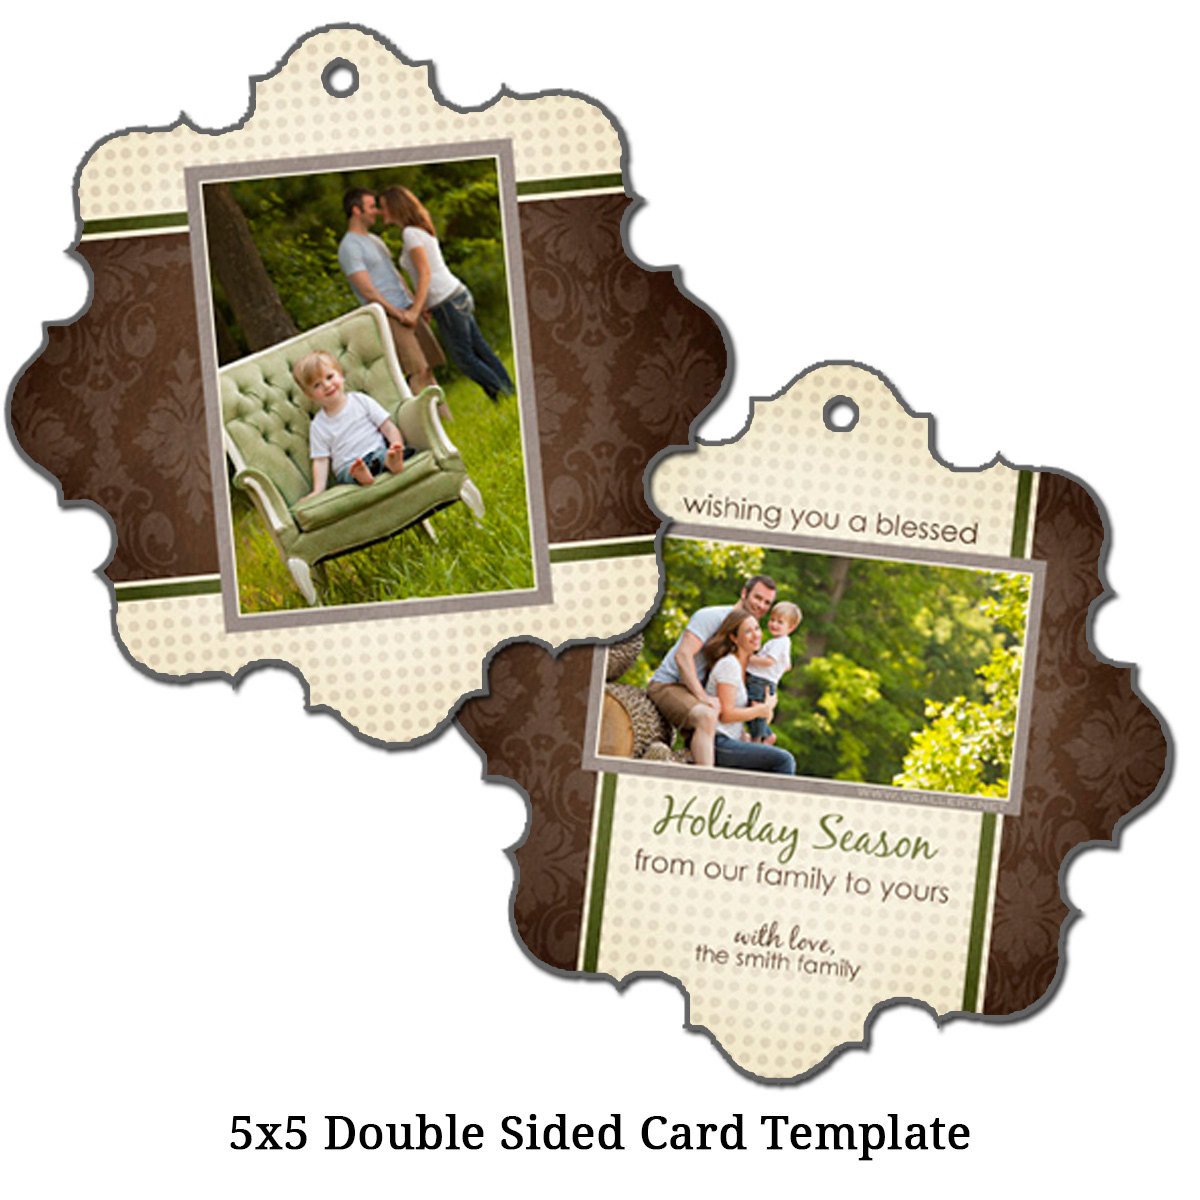 5x5 Double Sided Christmas Card Template by VGalleryDesigns